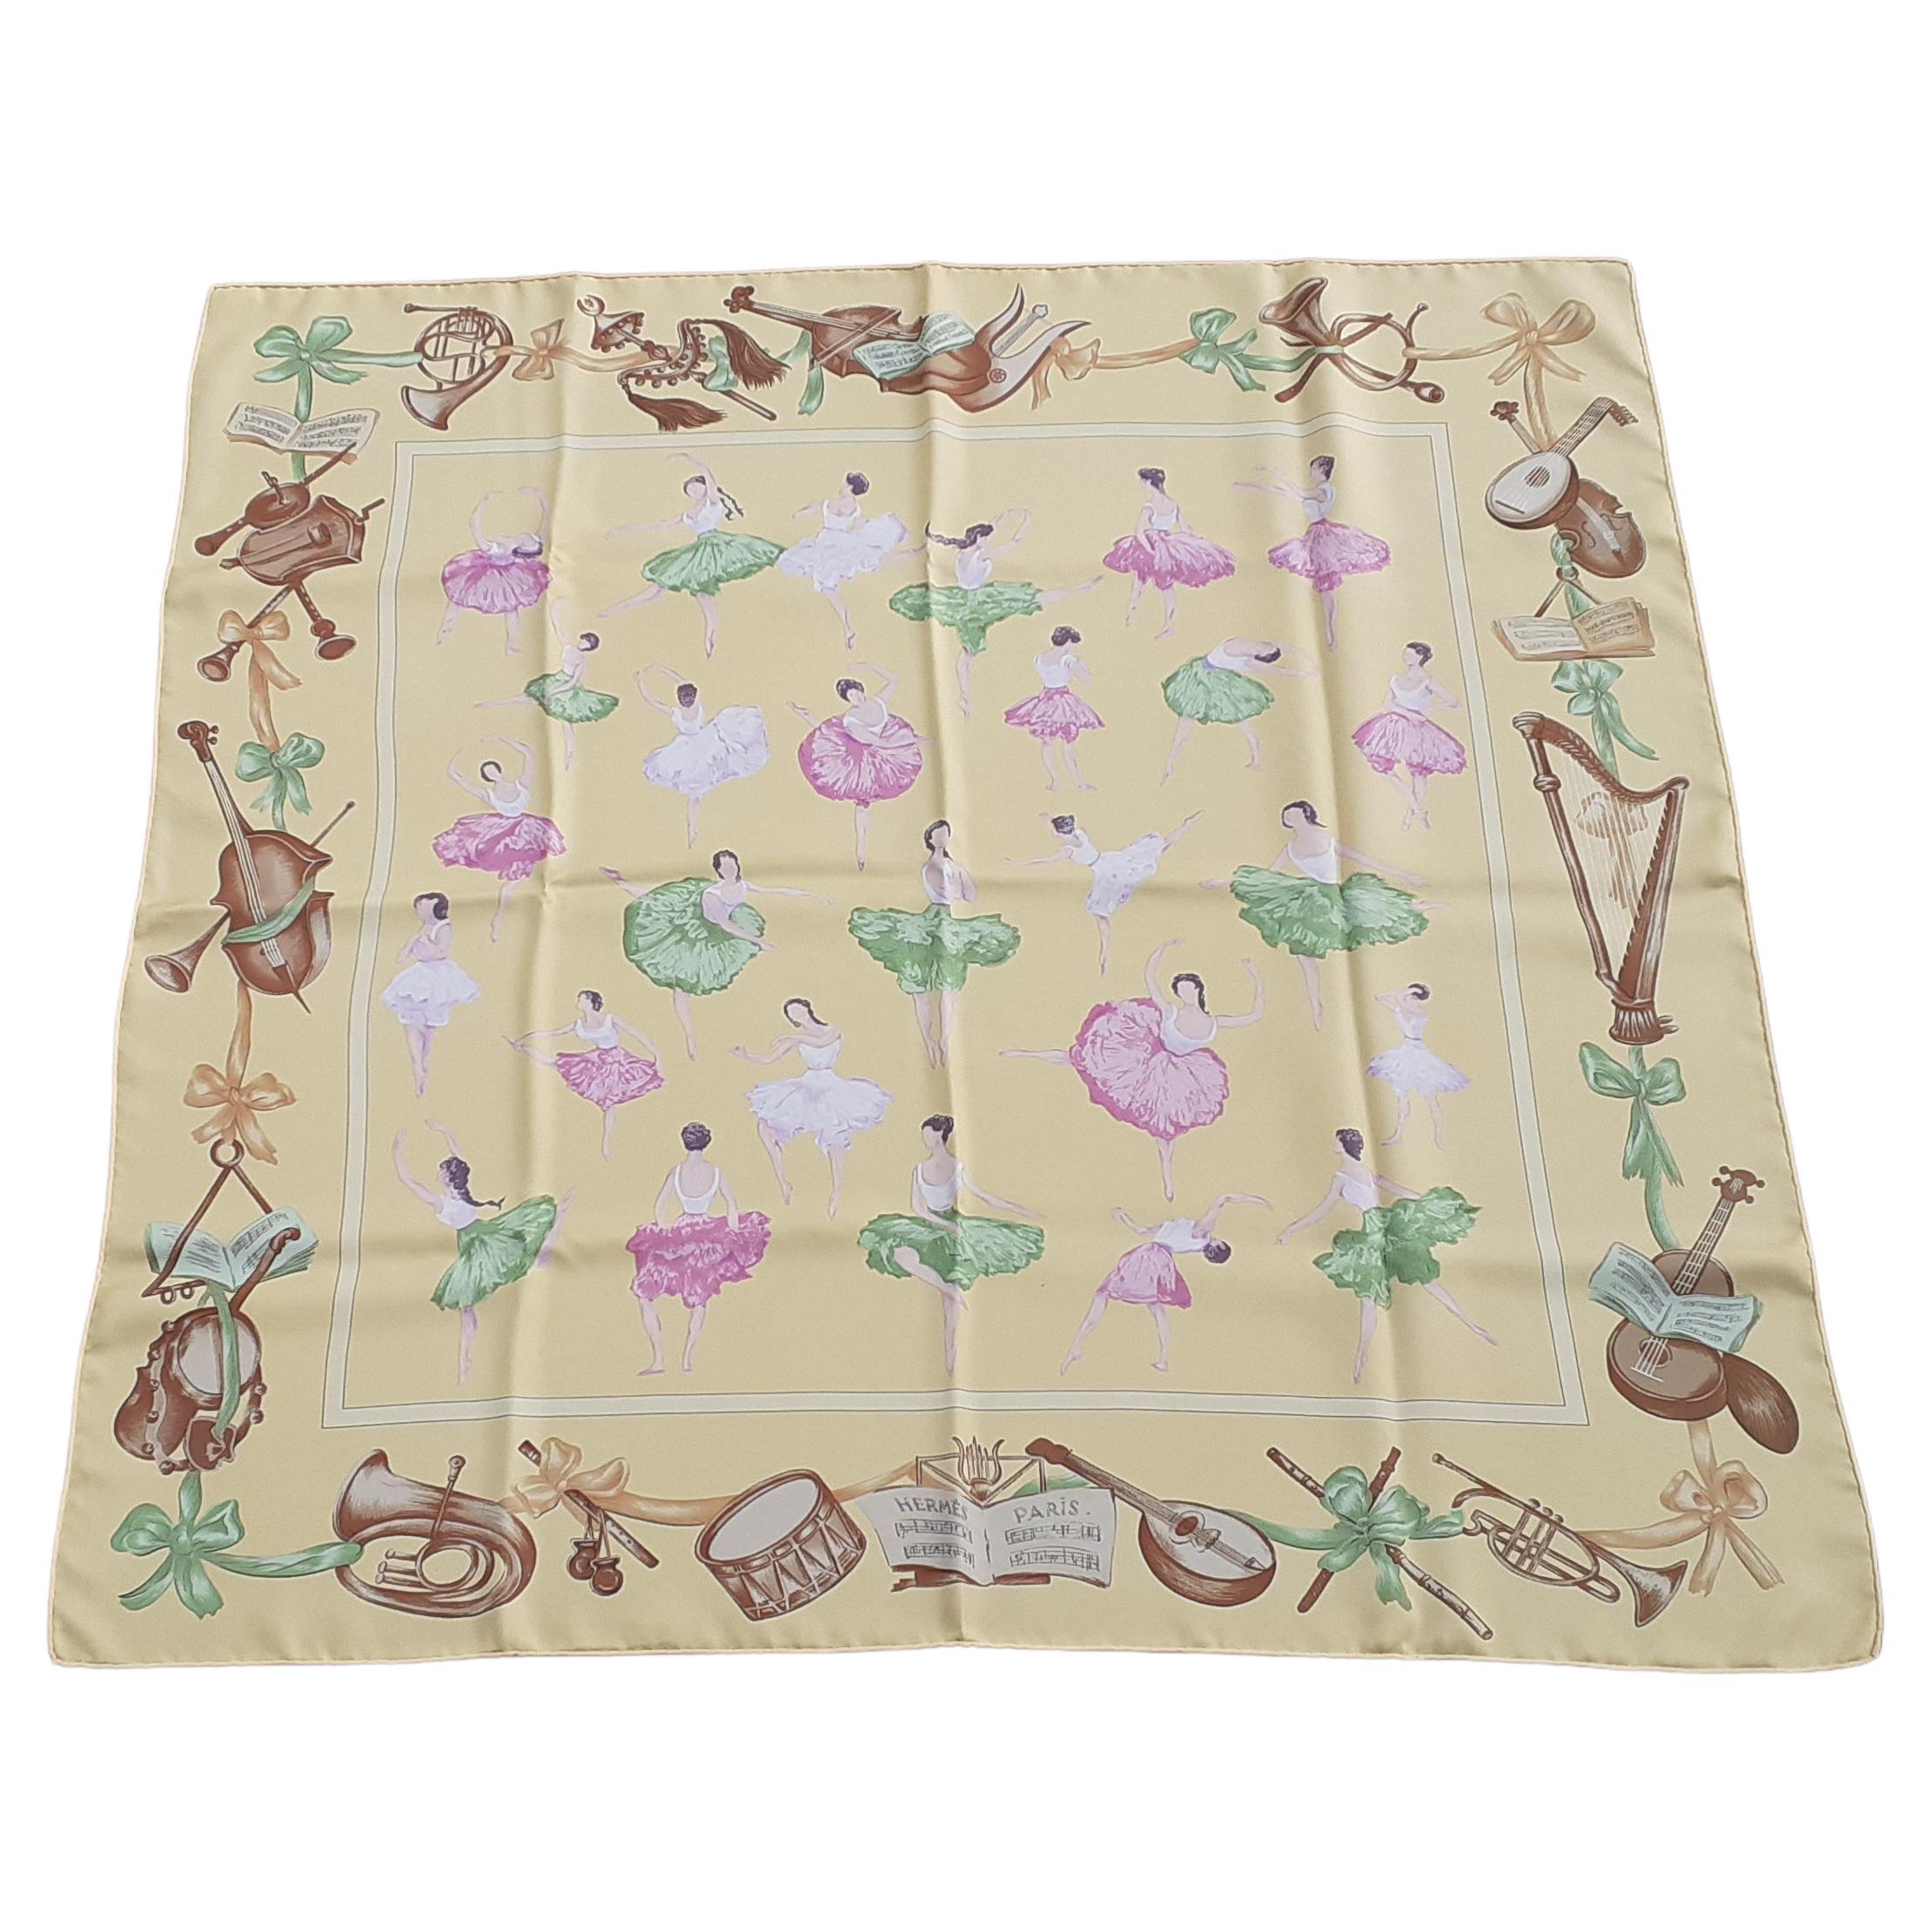 Sweet and Lovely Authentic Hermès Scarf

Print: La Danse

Designed by Jean Louis Clerc in 1961. This one is a reissue

Made in France

Made of 100% Silk

Colorways: Pale Yellow, Green, White, Pink, Brown

